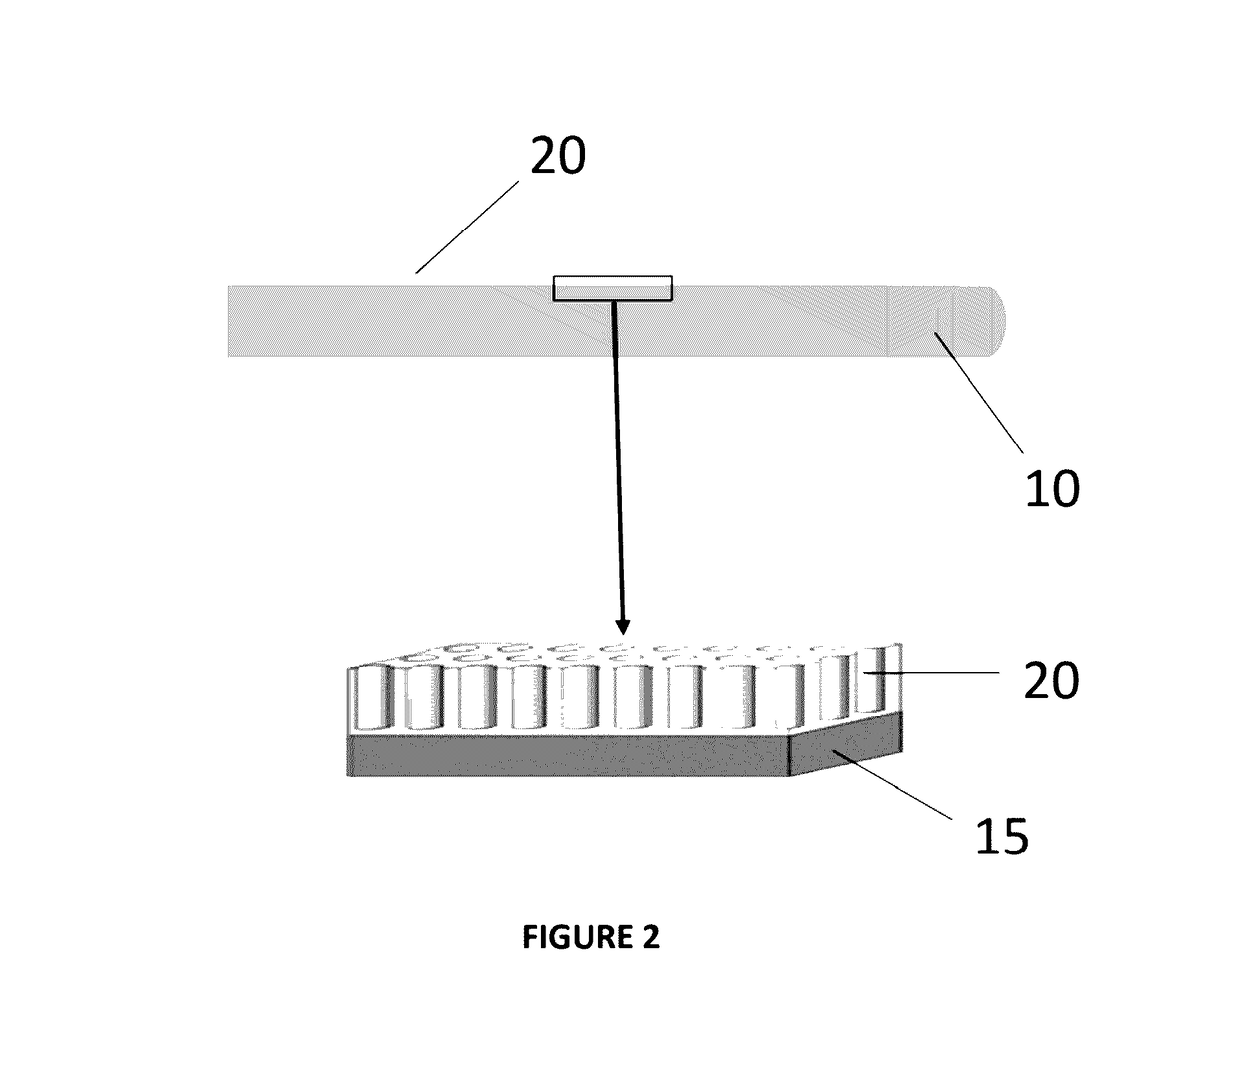 Method for preserving a mark on a metallic workpiece